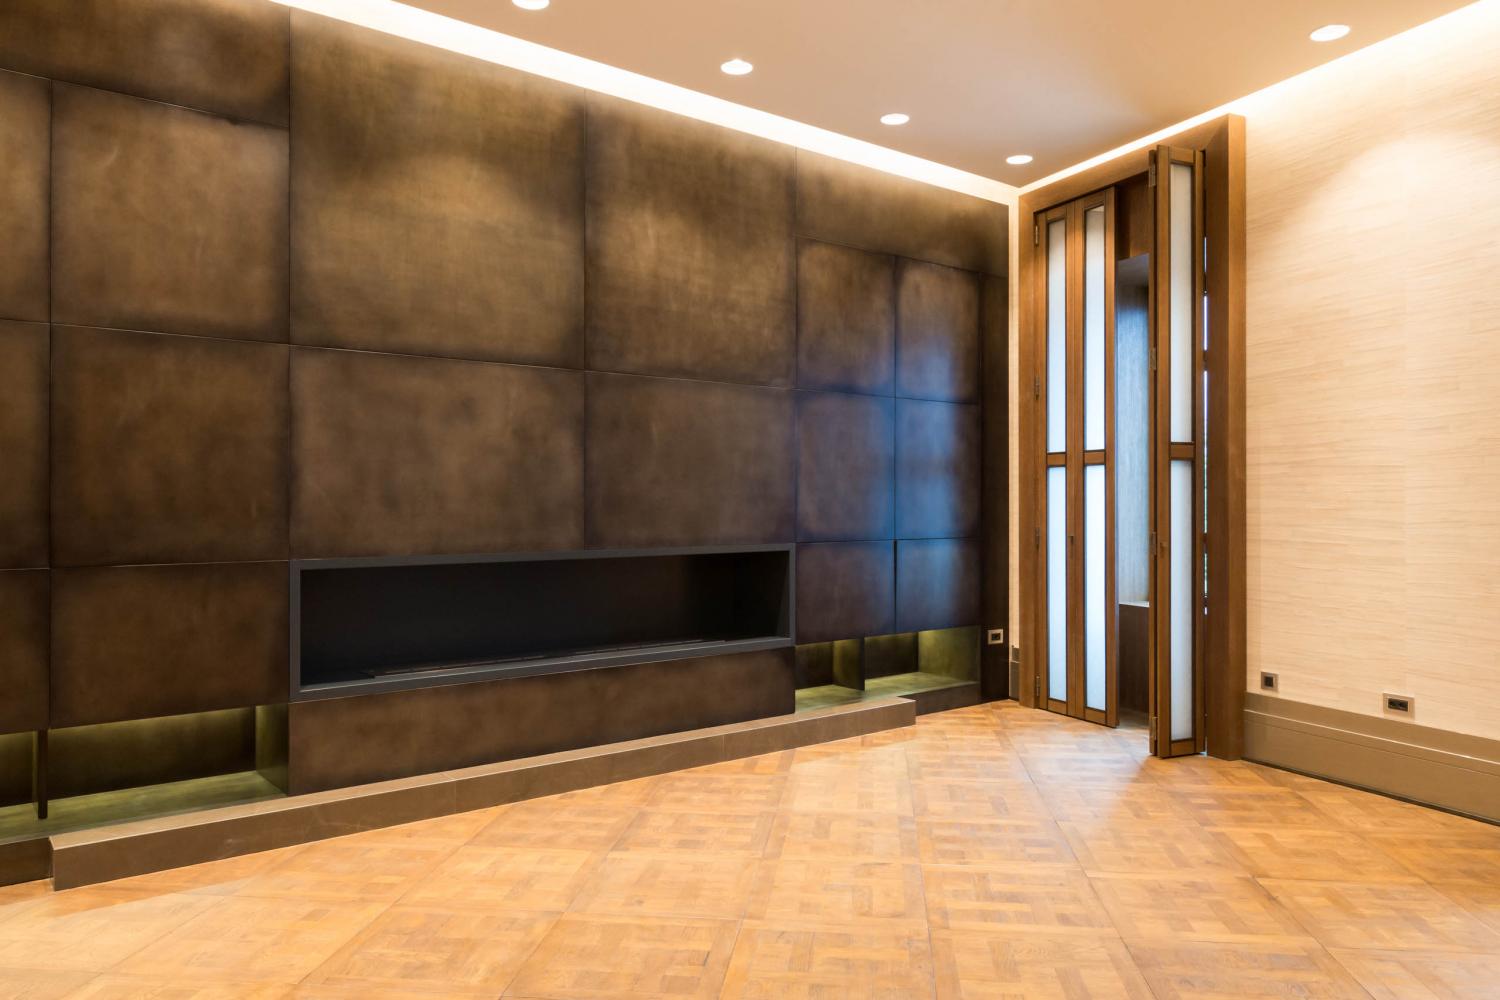 Luxury private apartment in Lugano, decorated with Laurameroni Decor Wall Panels Boiserie in carved, textured wood